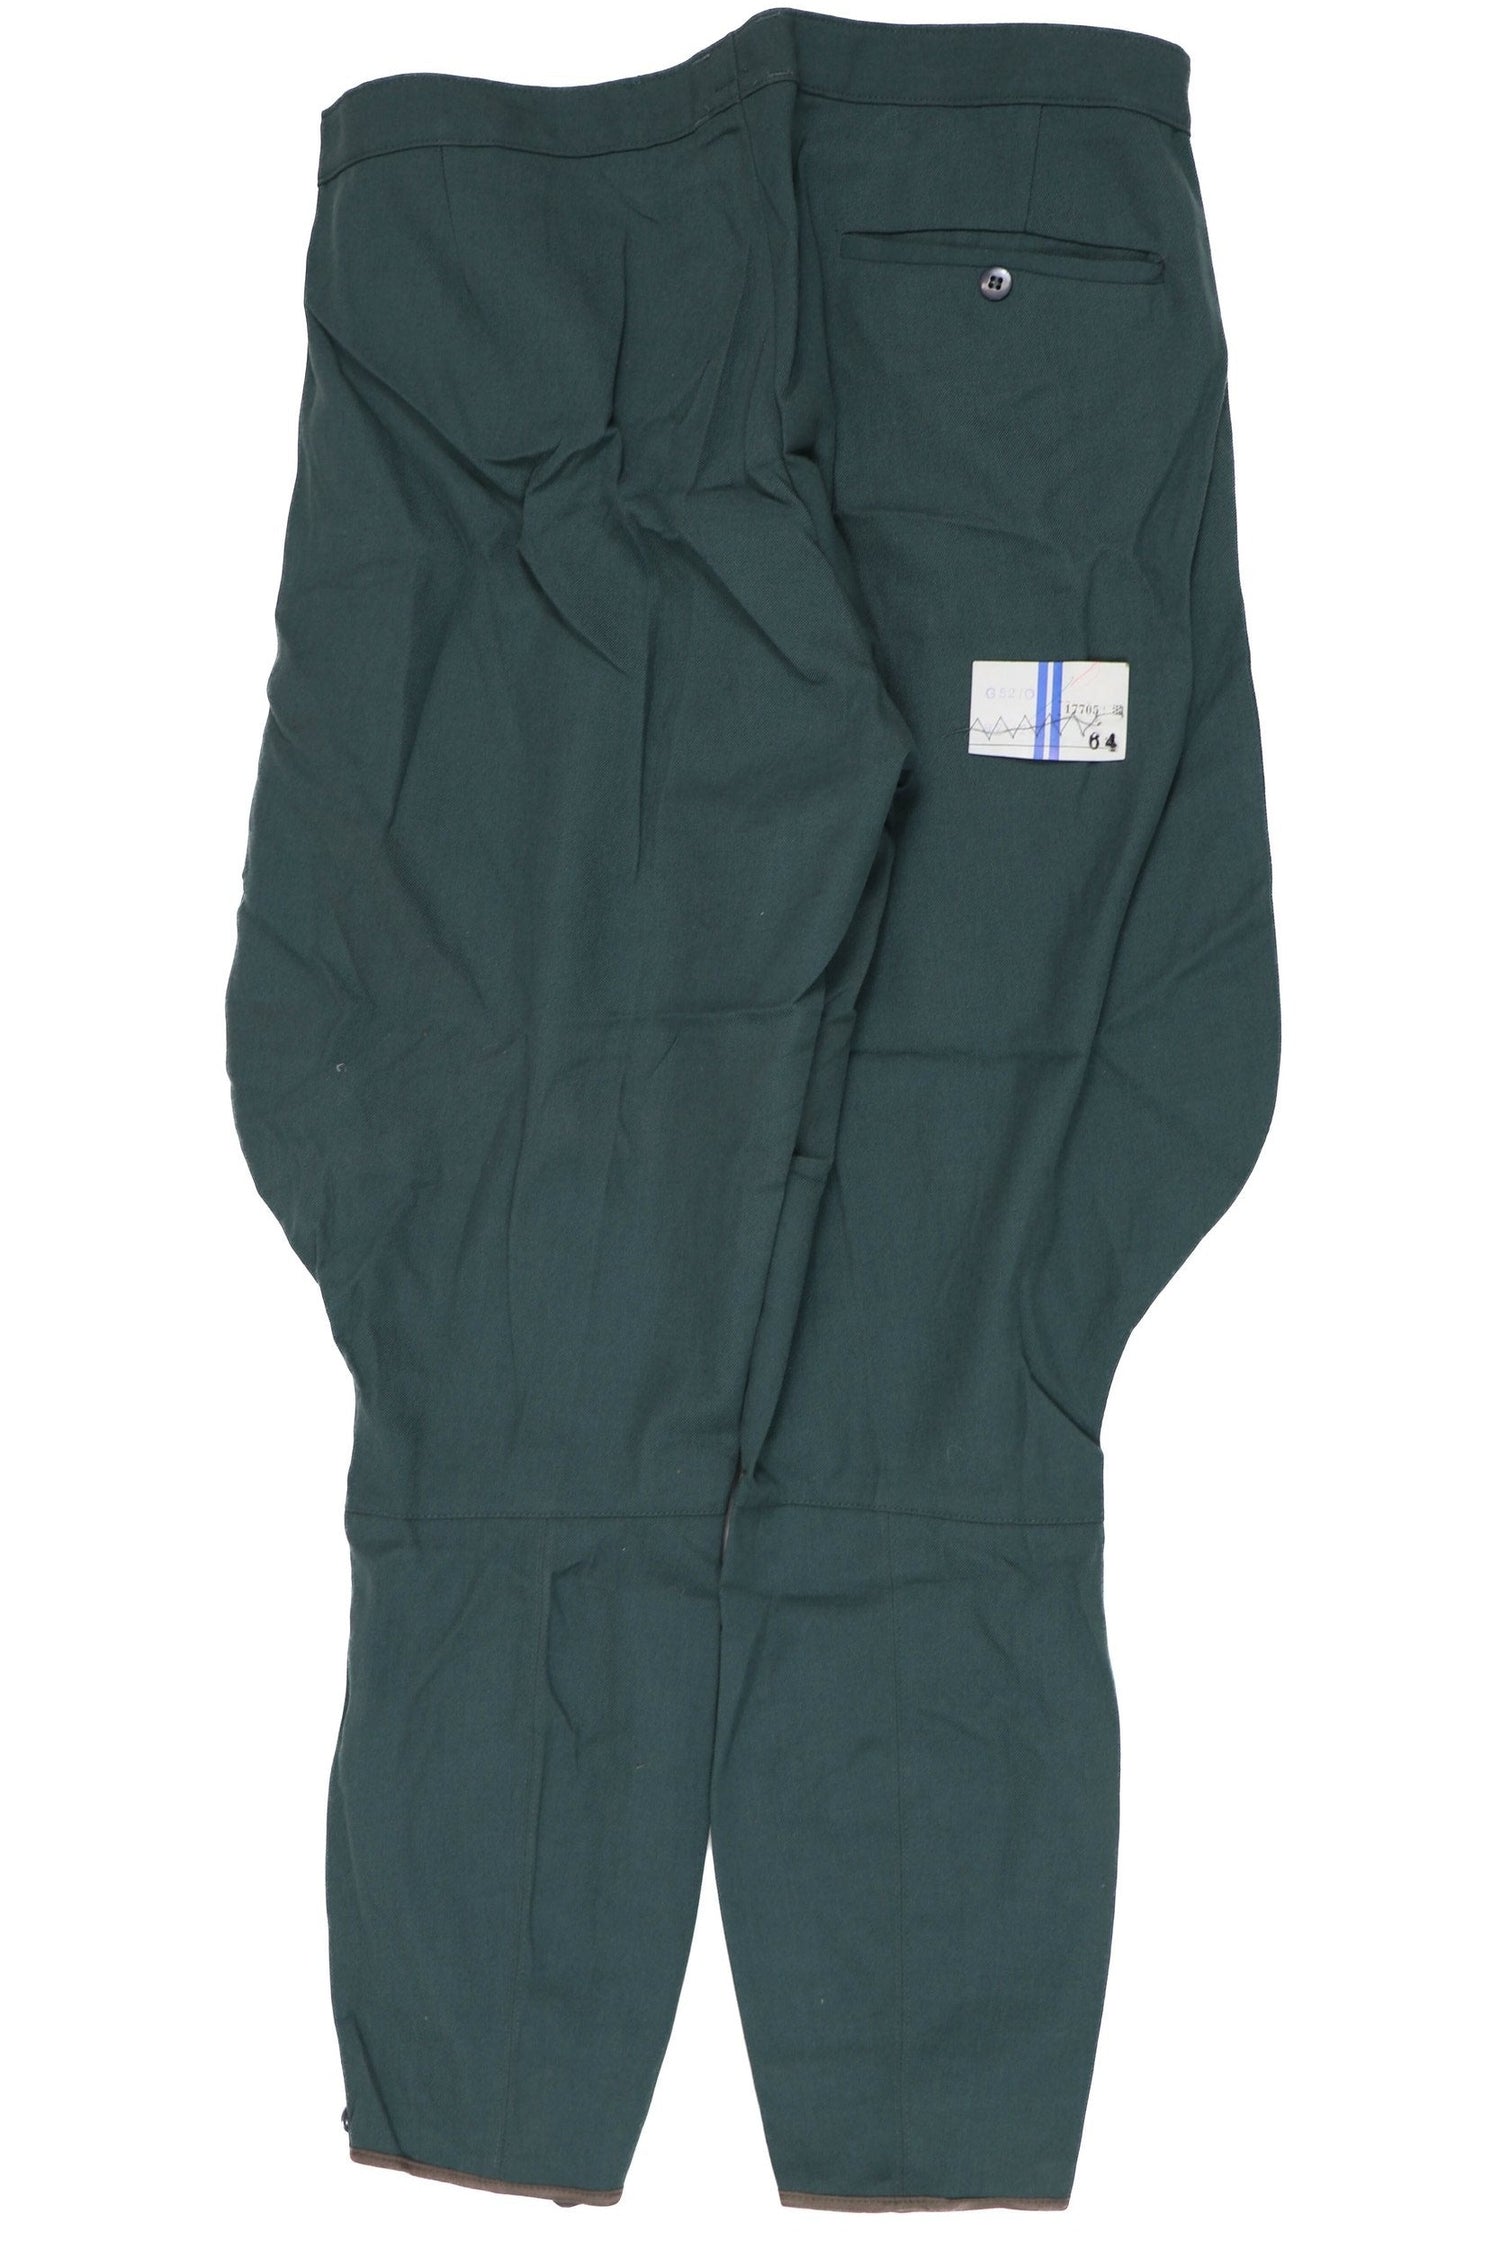 East German Green Officer Trousers